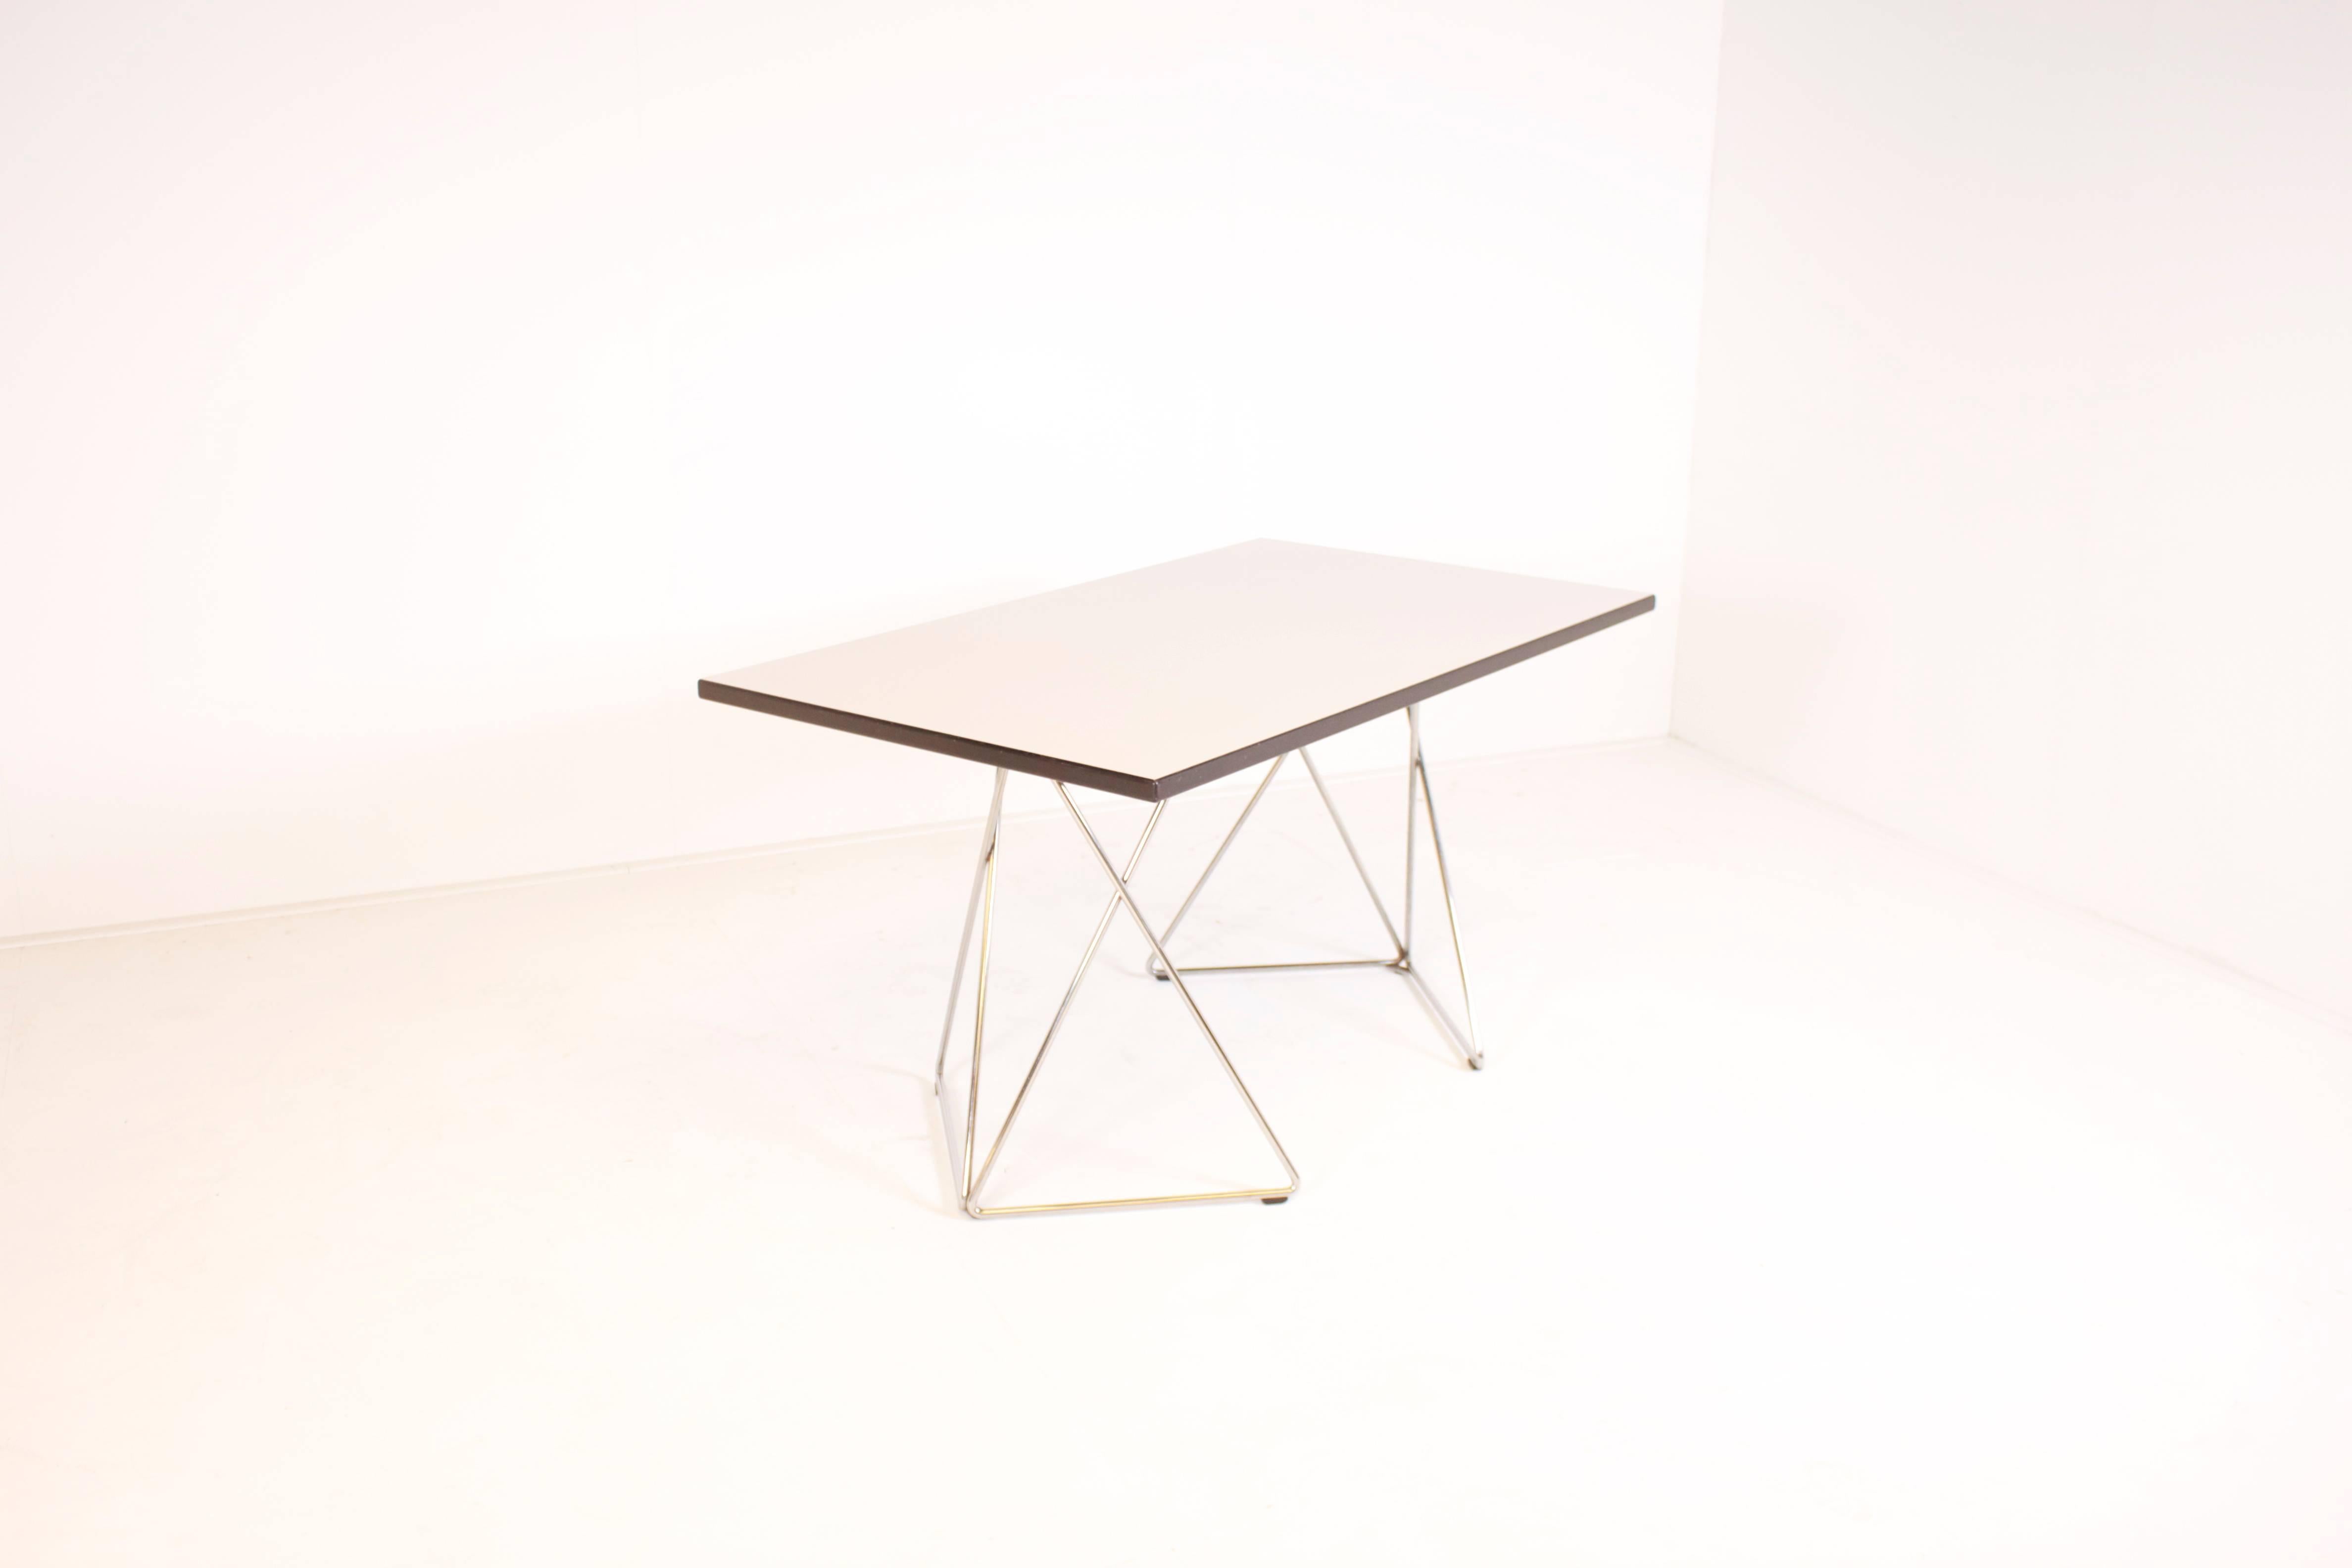 Very nice Thonet Formica table.

This table is ideal as a compact dining table or writing desk.

Marked with manufacturers label.

Chromed metal Eiffel base.

Light grey Formica top with a black lacquered wooden rim.

Goes very well with Charles